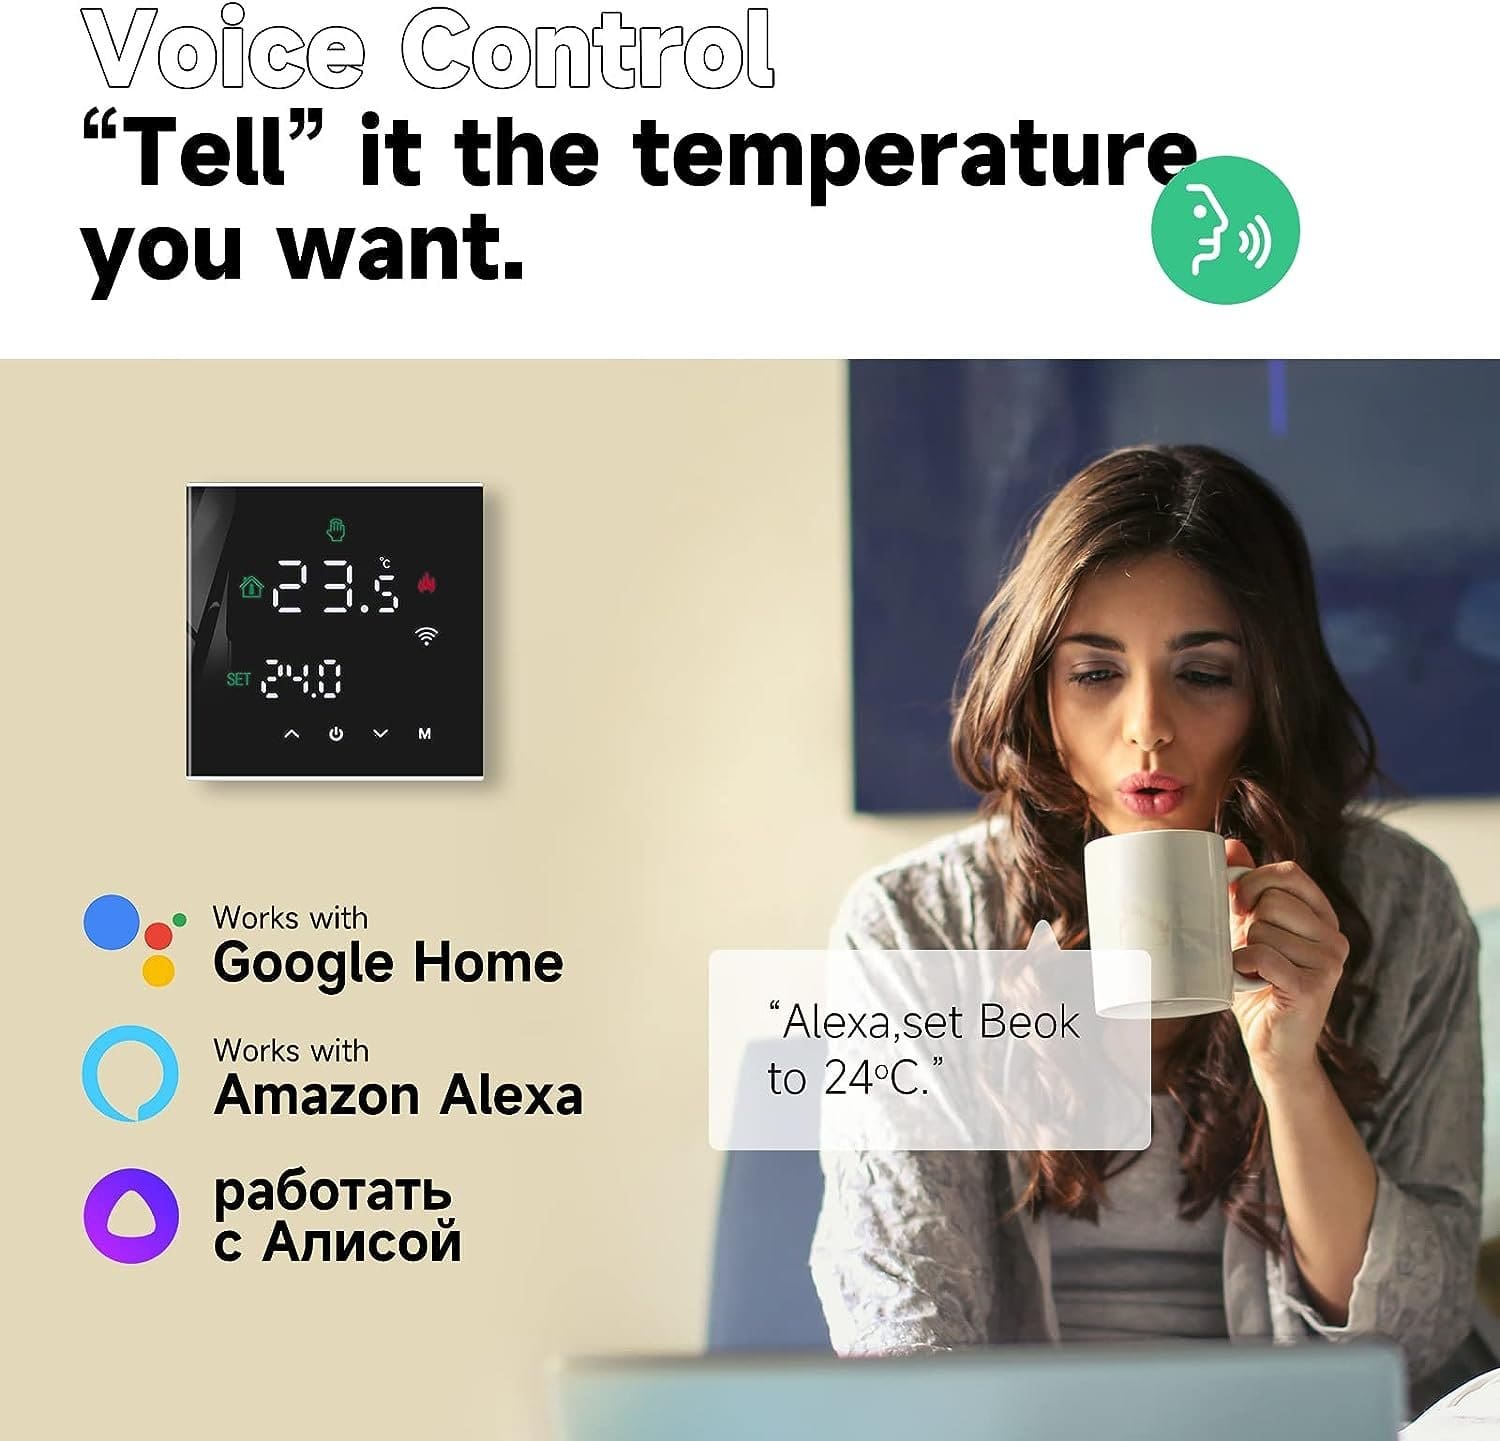 Are Smart Thermostats Expensive To Purchase And Install?